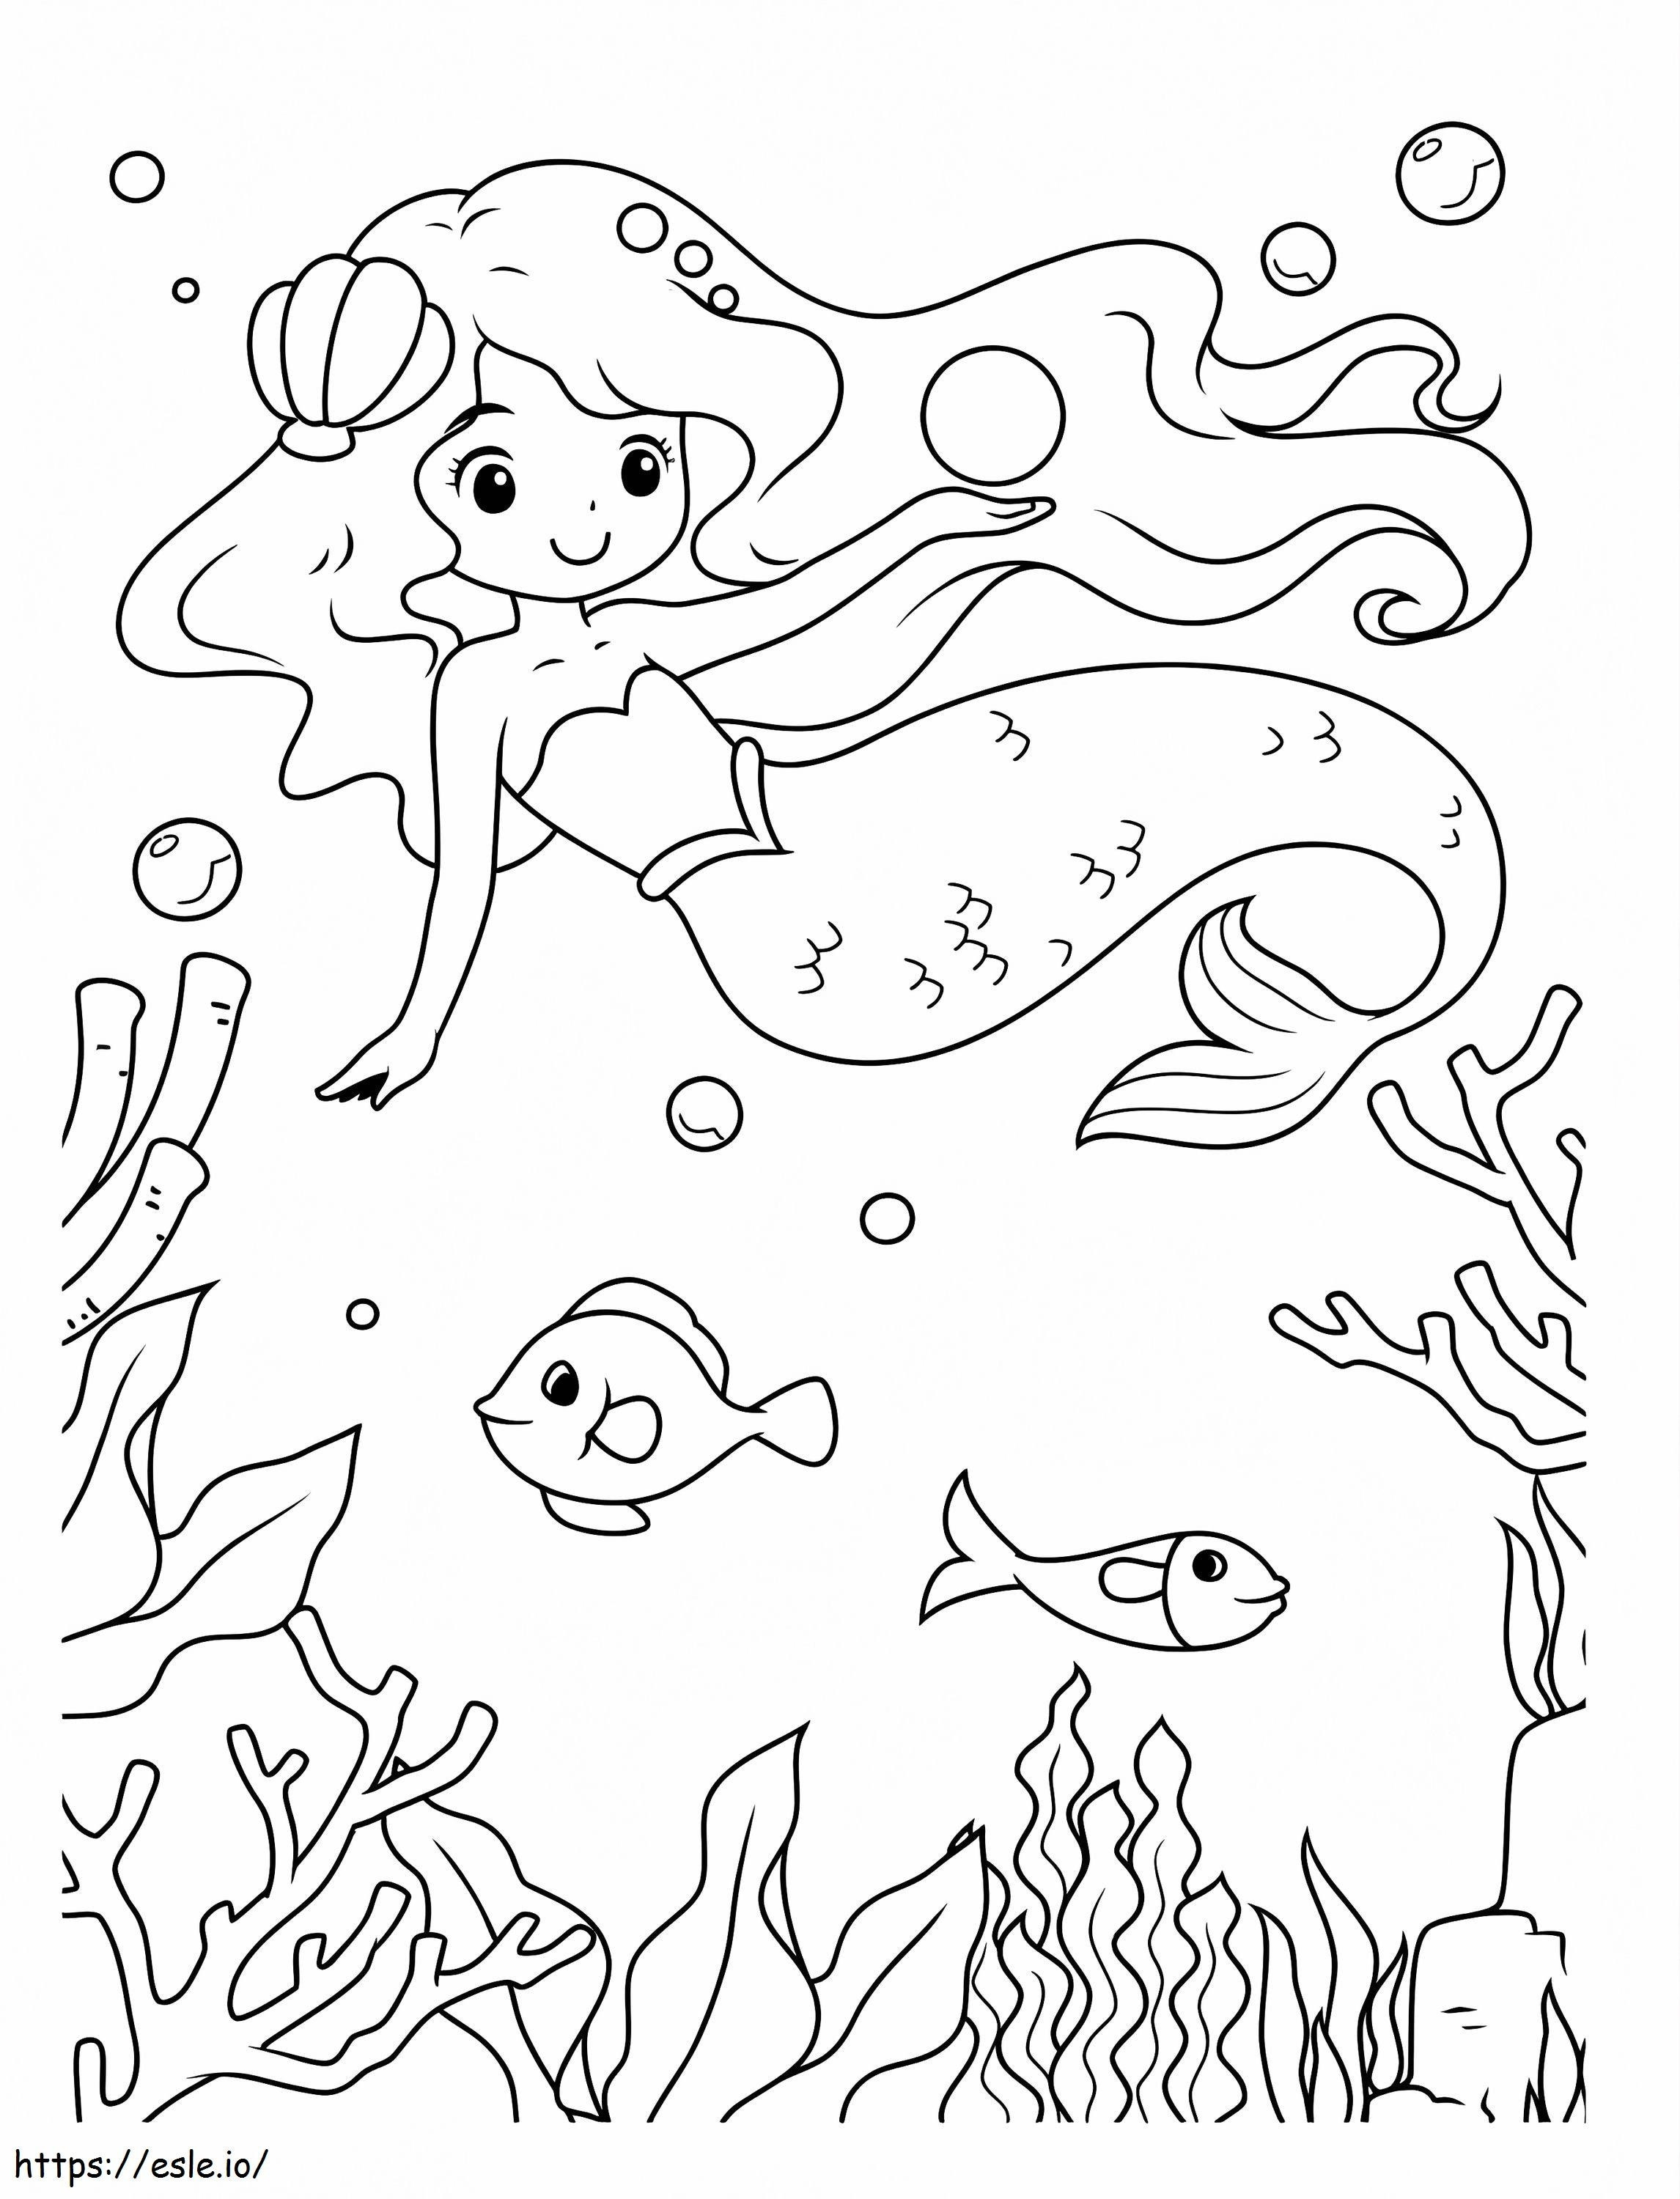 Mermaid And Fishes coloring page